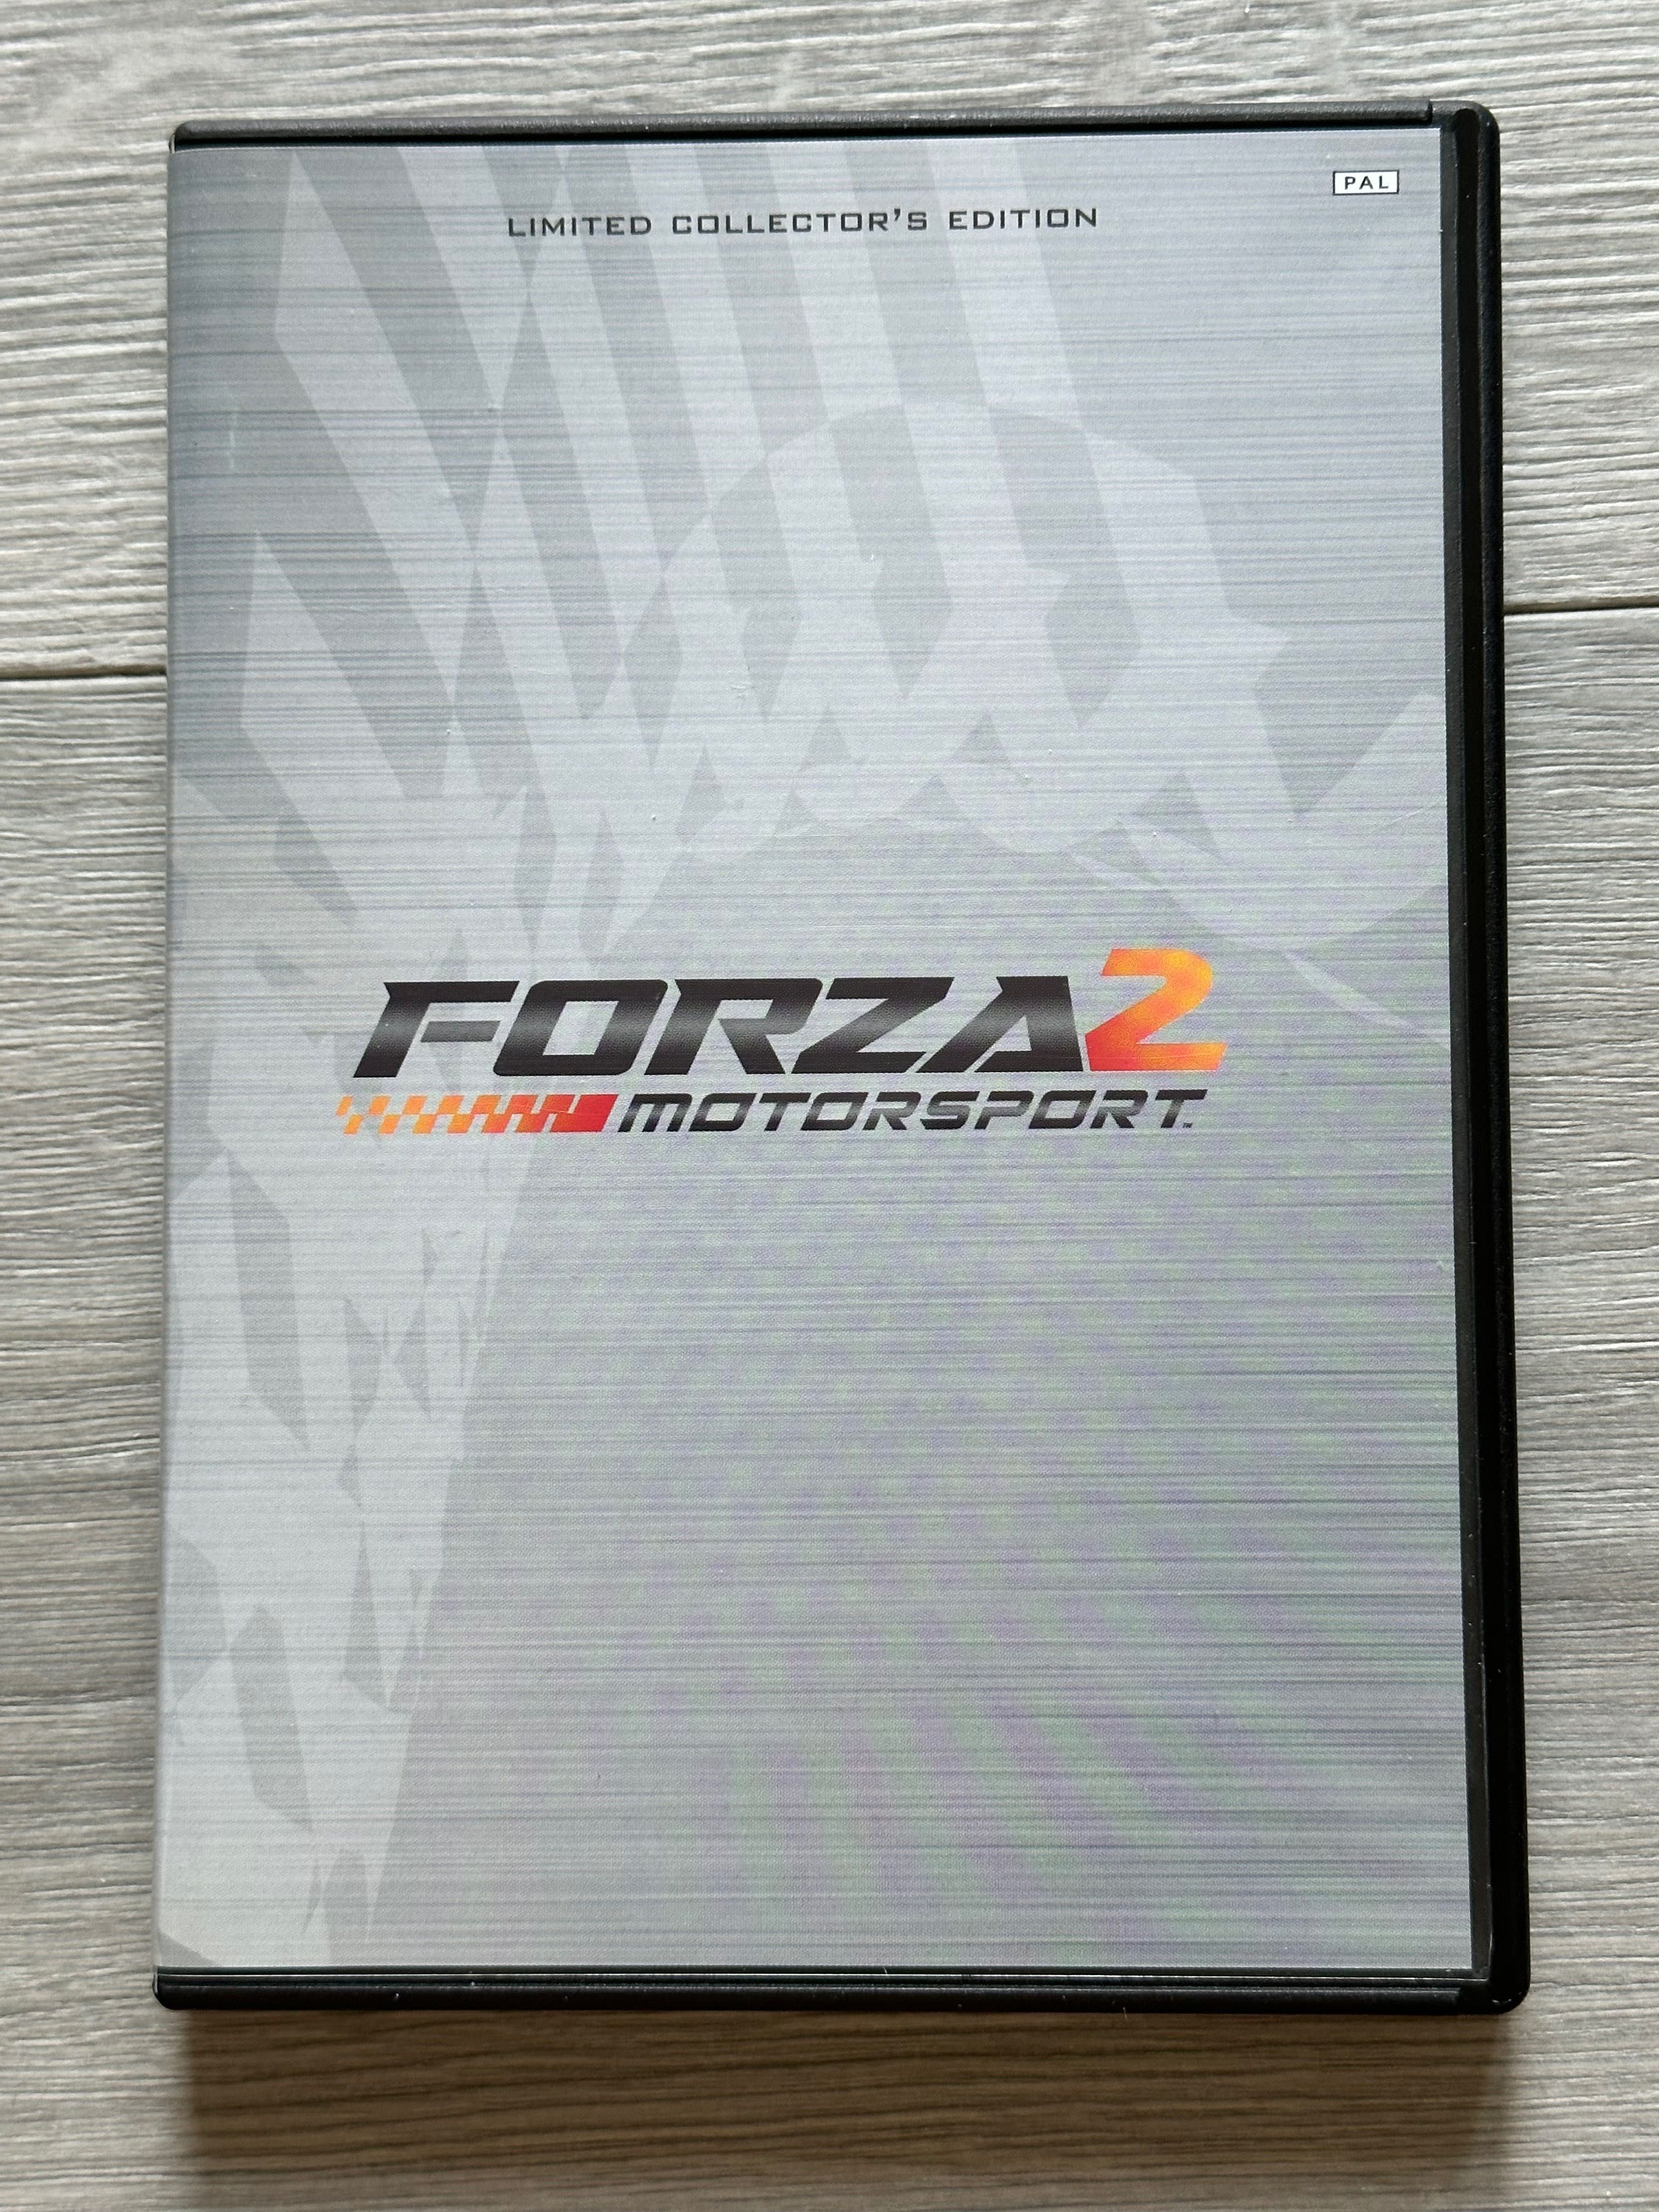 Forza Motorsport 2 (Limited Collector's Edition) / Xbox 360